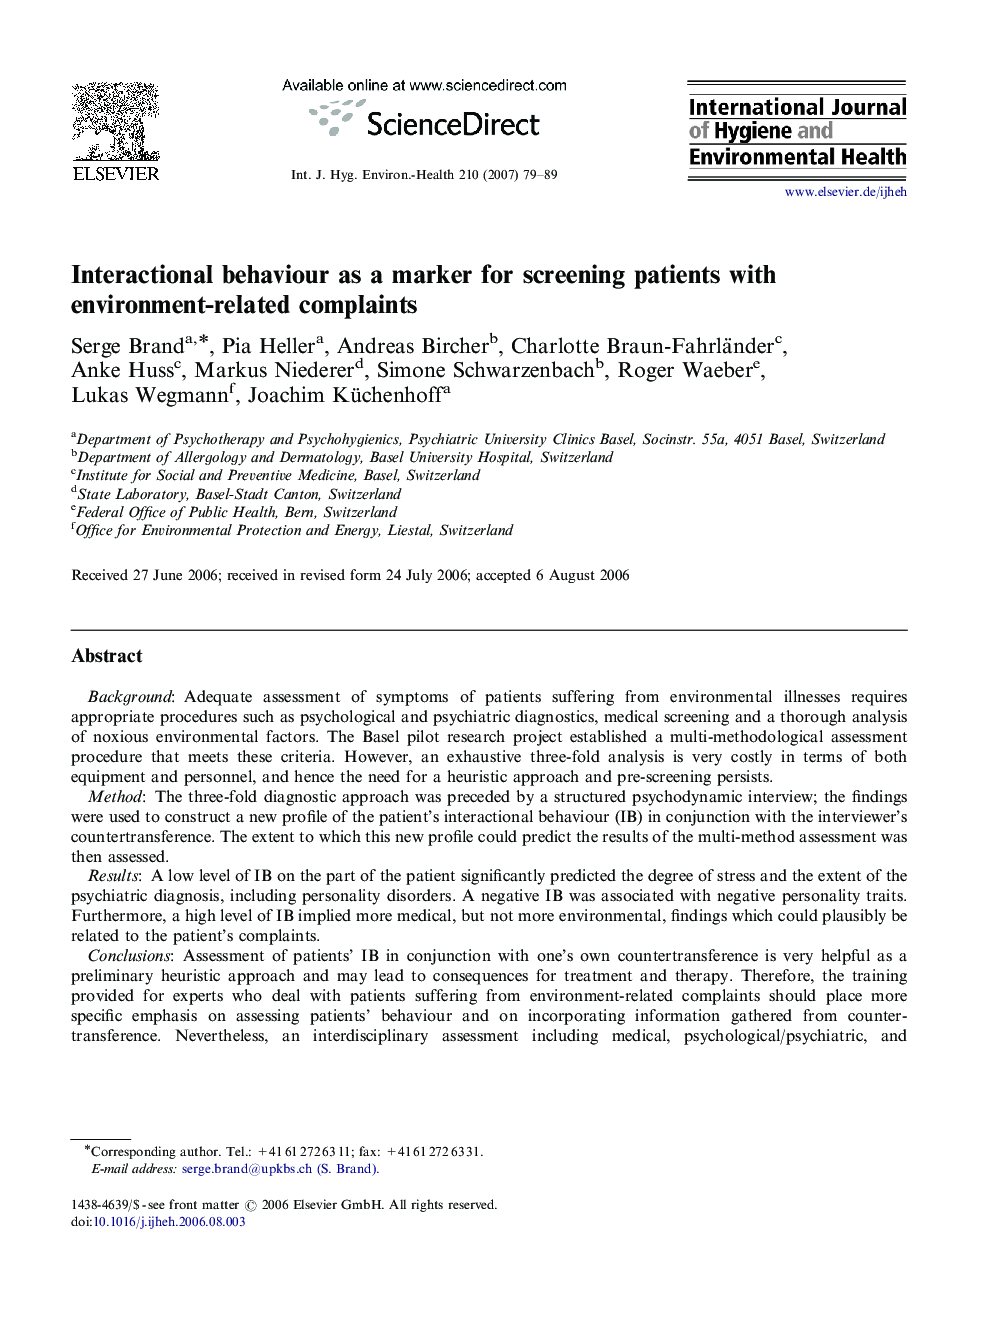 Interactional behaviour as a marker for screening patients with environment-related complaints